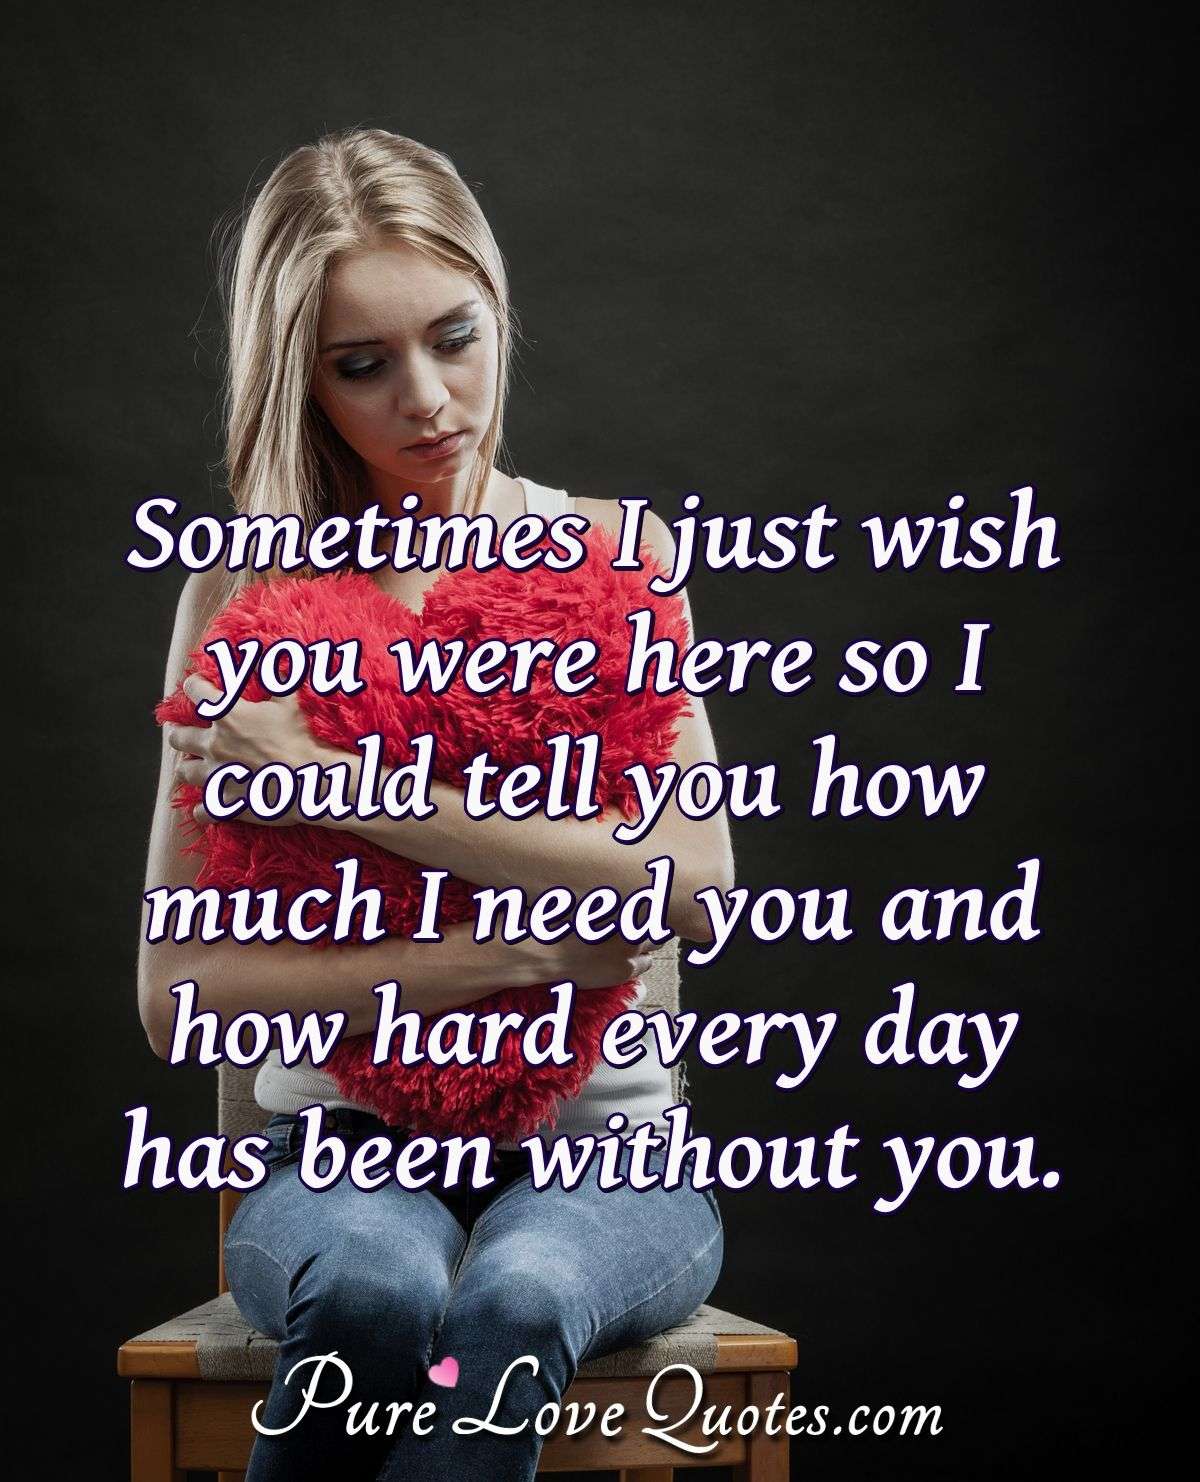 Sometimes I just wish you were here so I could tell you how much I need you and how hard every day has been without you. - Anonymous